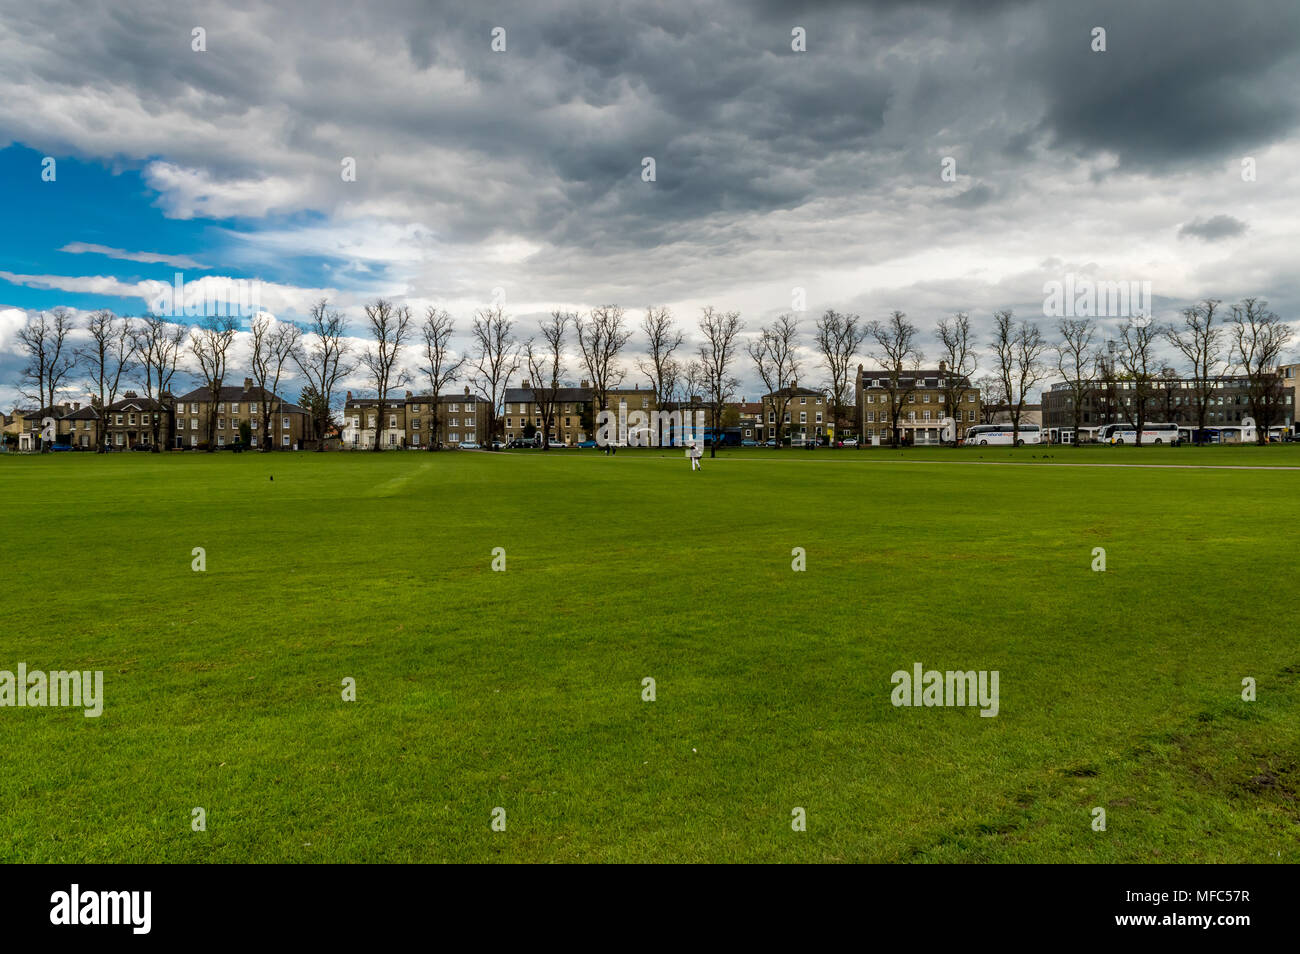 Parker's piece is large park in Cambridge, Cambridgeshire, England, United Kingdom under the evening sky with clouds Stock Photo